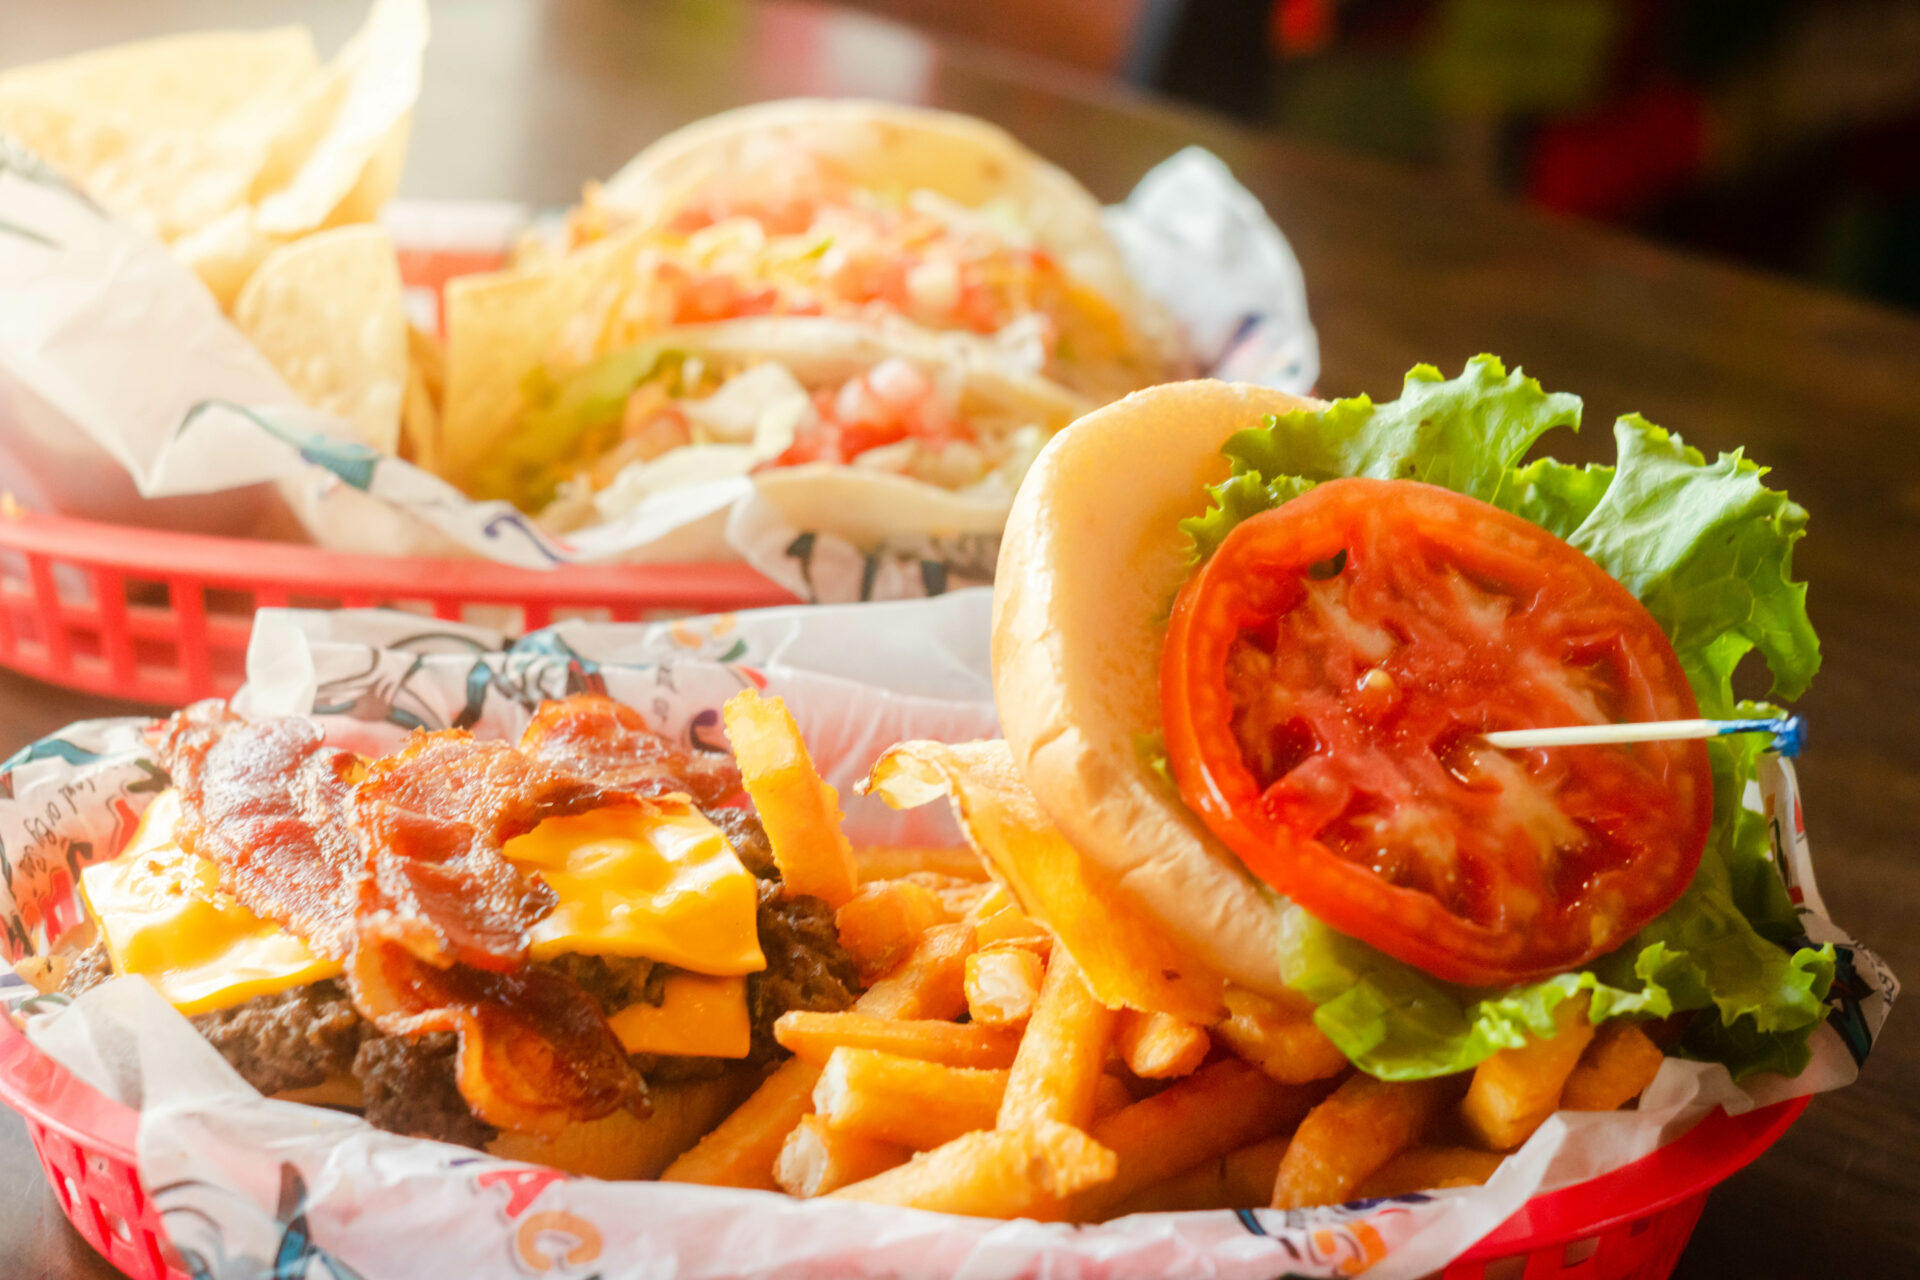 Tacky Jack's burger and tacos in basket in Gulf Shores--best family friendly restaurants in gulf shores, photo courtesy of Alabama Beaches Tourism